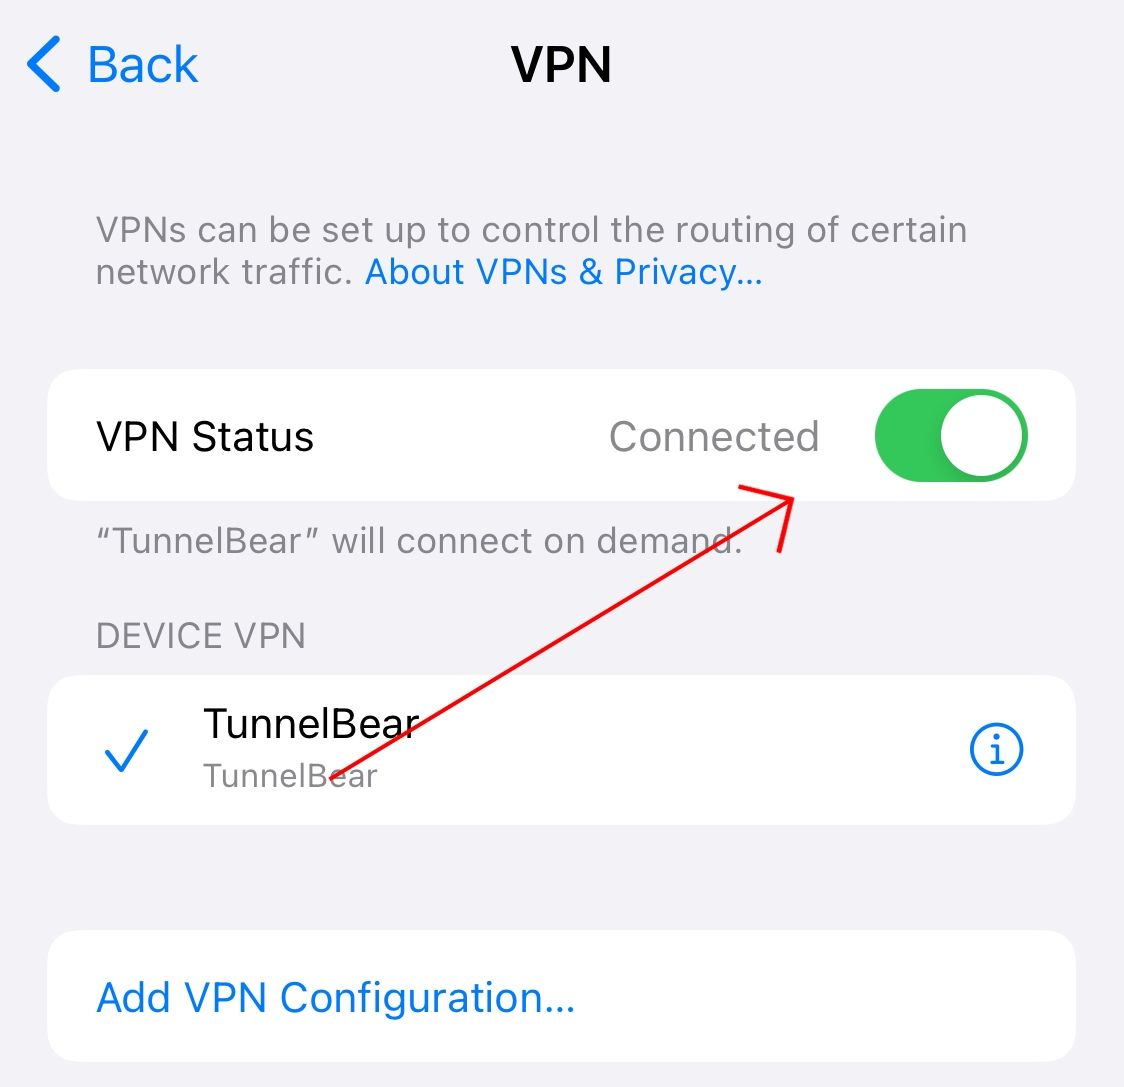 Toggle your iPhone's VPN off.